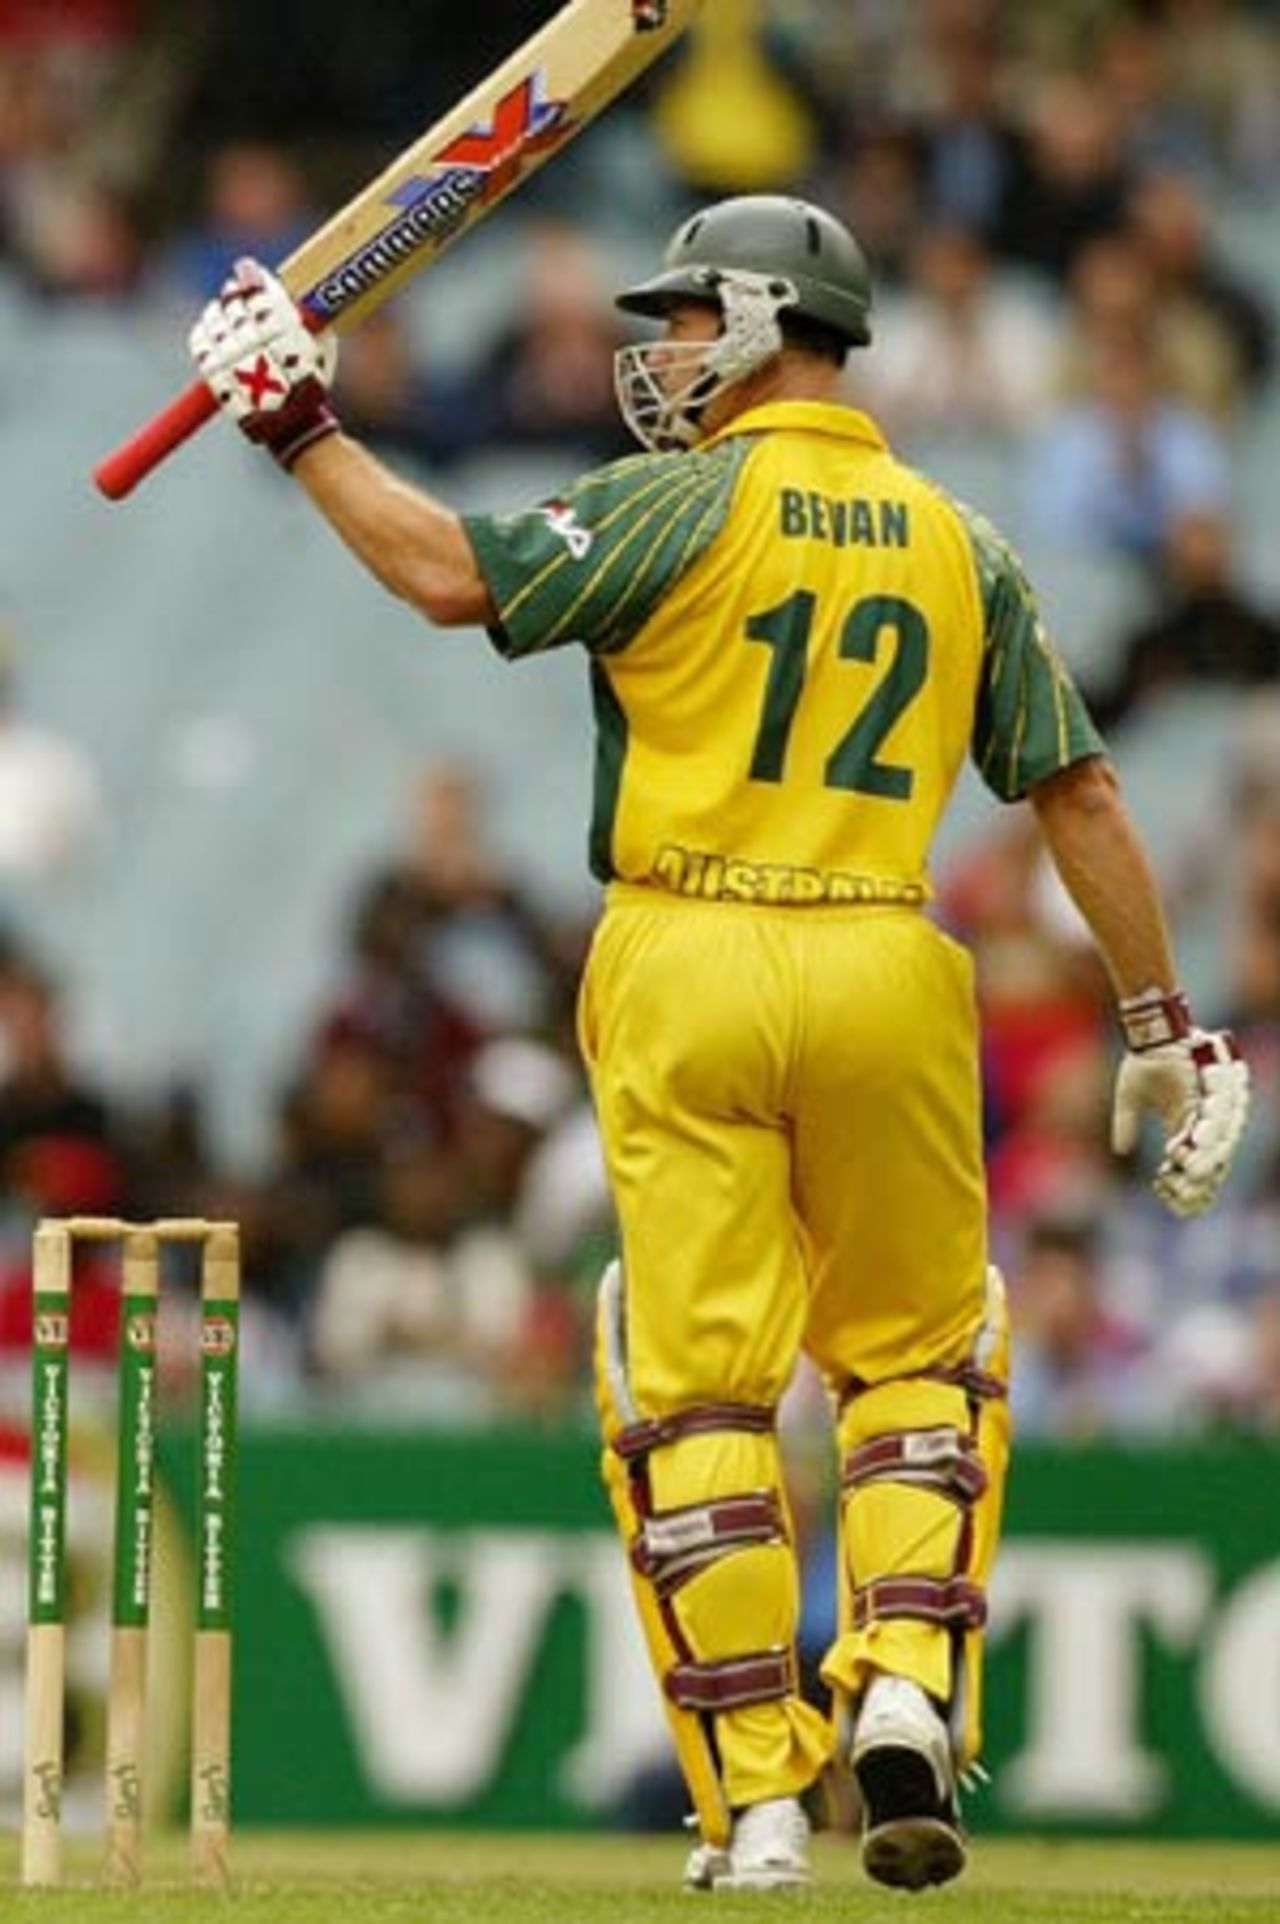 Amidst all the wickets Michael Bevan stayed calm and reached 50, Australia v Zimbabwe, 10th ODI, VB Series, Melbourne, January 29, 2004